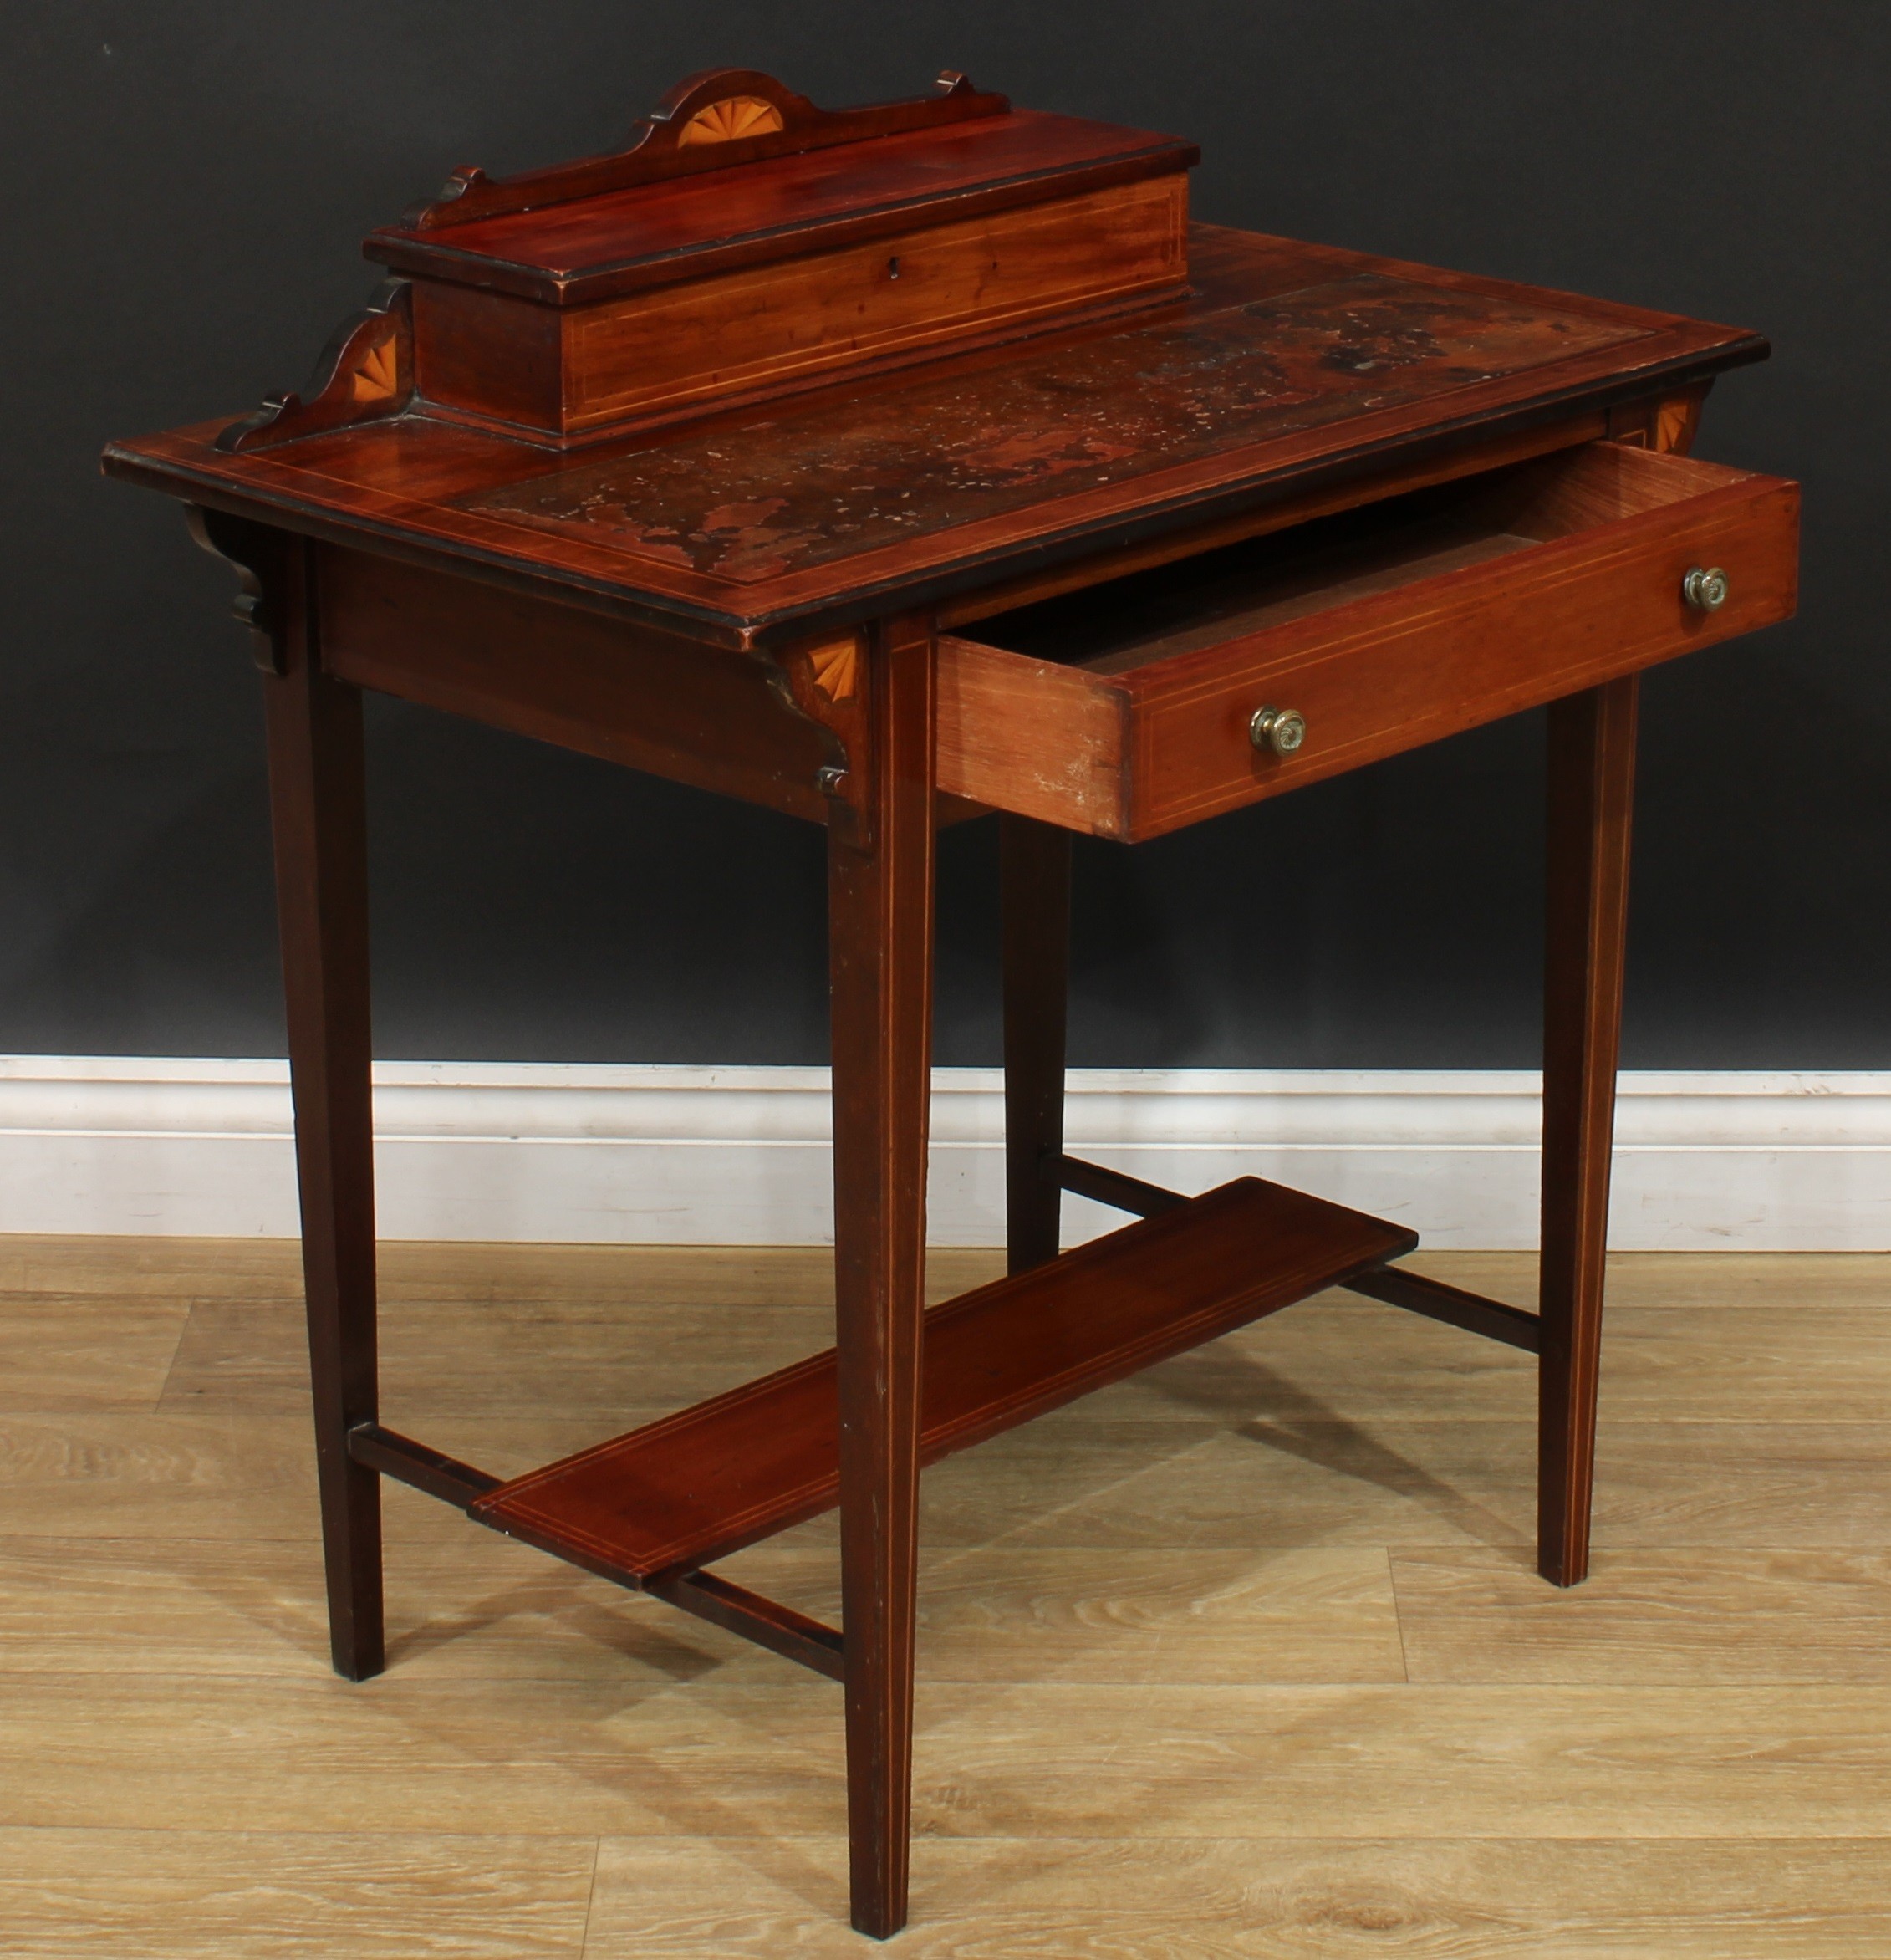 An Edwardian mahogany and marquetry desk, 82cm high, 76cm wide, 44.5cm deep, c.1905 - Image 4 of 4